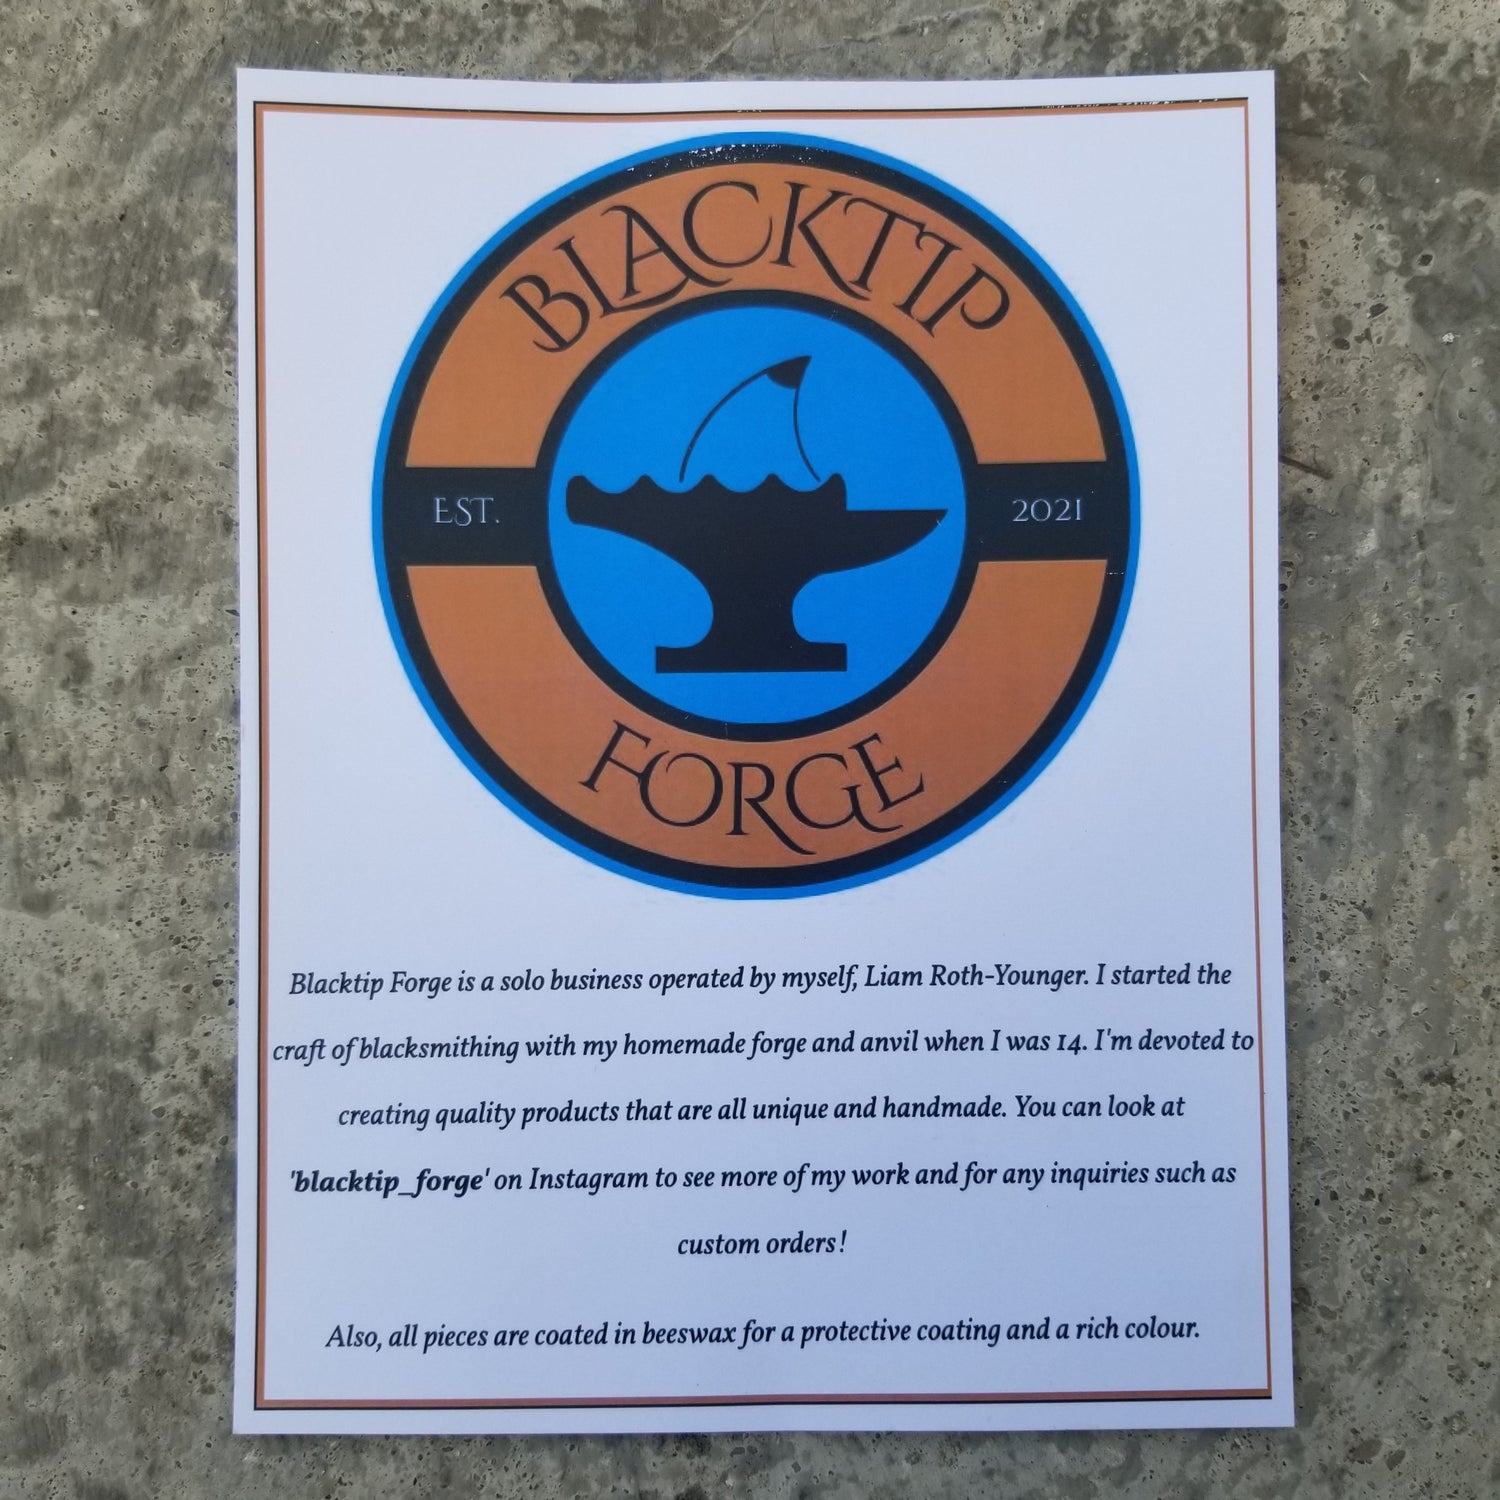 Blacktip forge; about the business